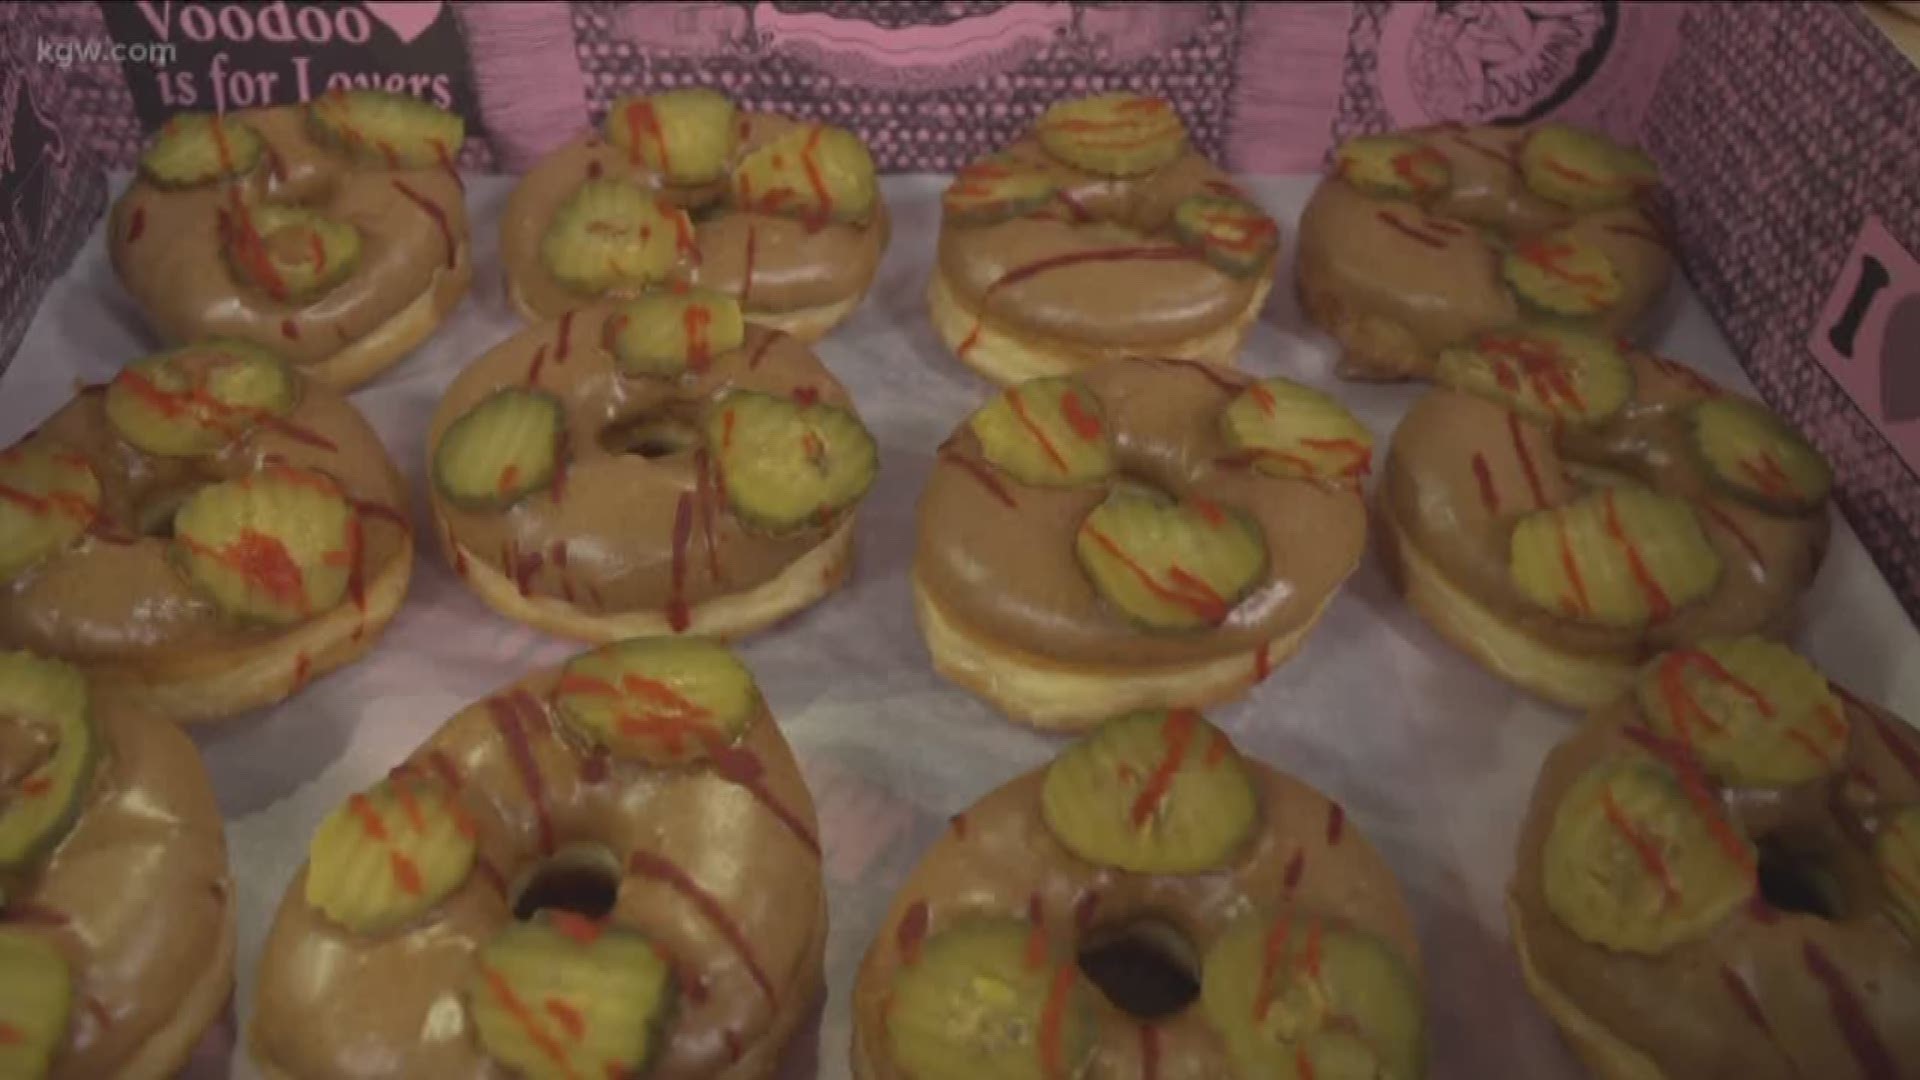 Voodoo Doughnut teams up with the Portland Pickles to create a doughnut. Try it at Friday night's game where Cat Daddy & Tres will throw out the first pitch.
portlandpicklesbaseball.com
#TonightwithCassidy